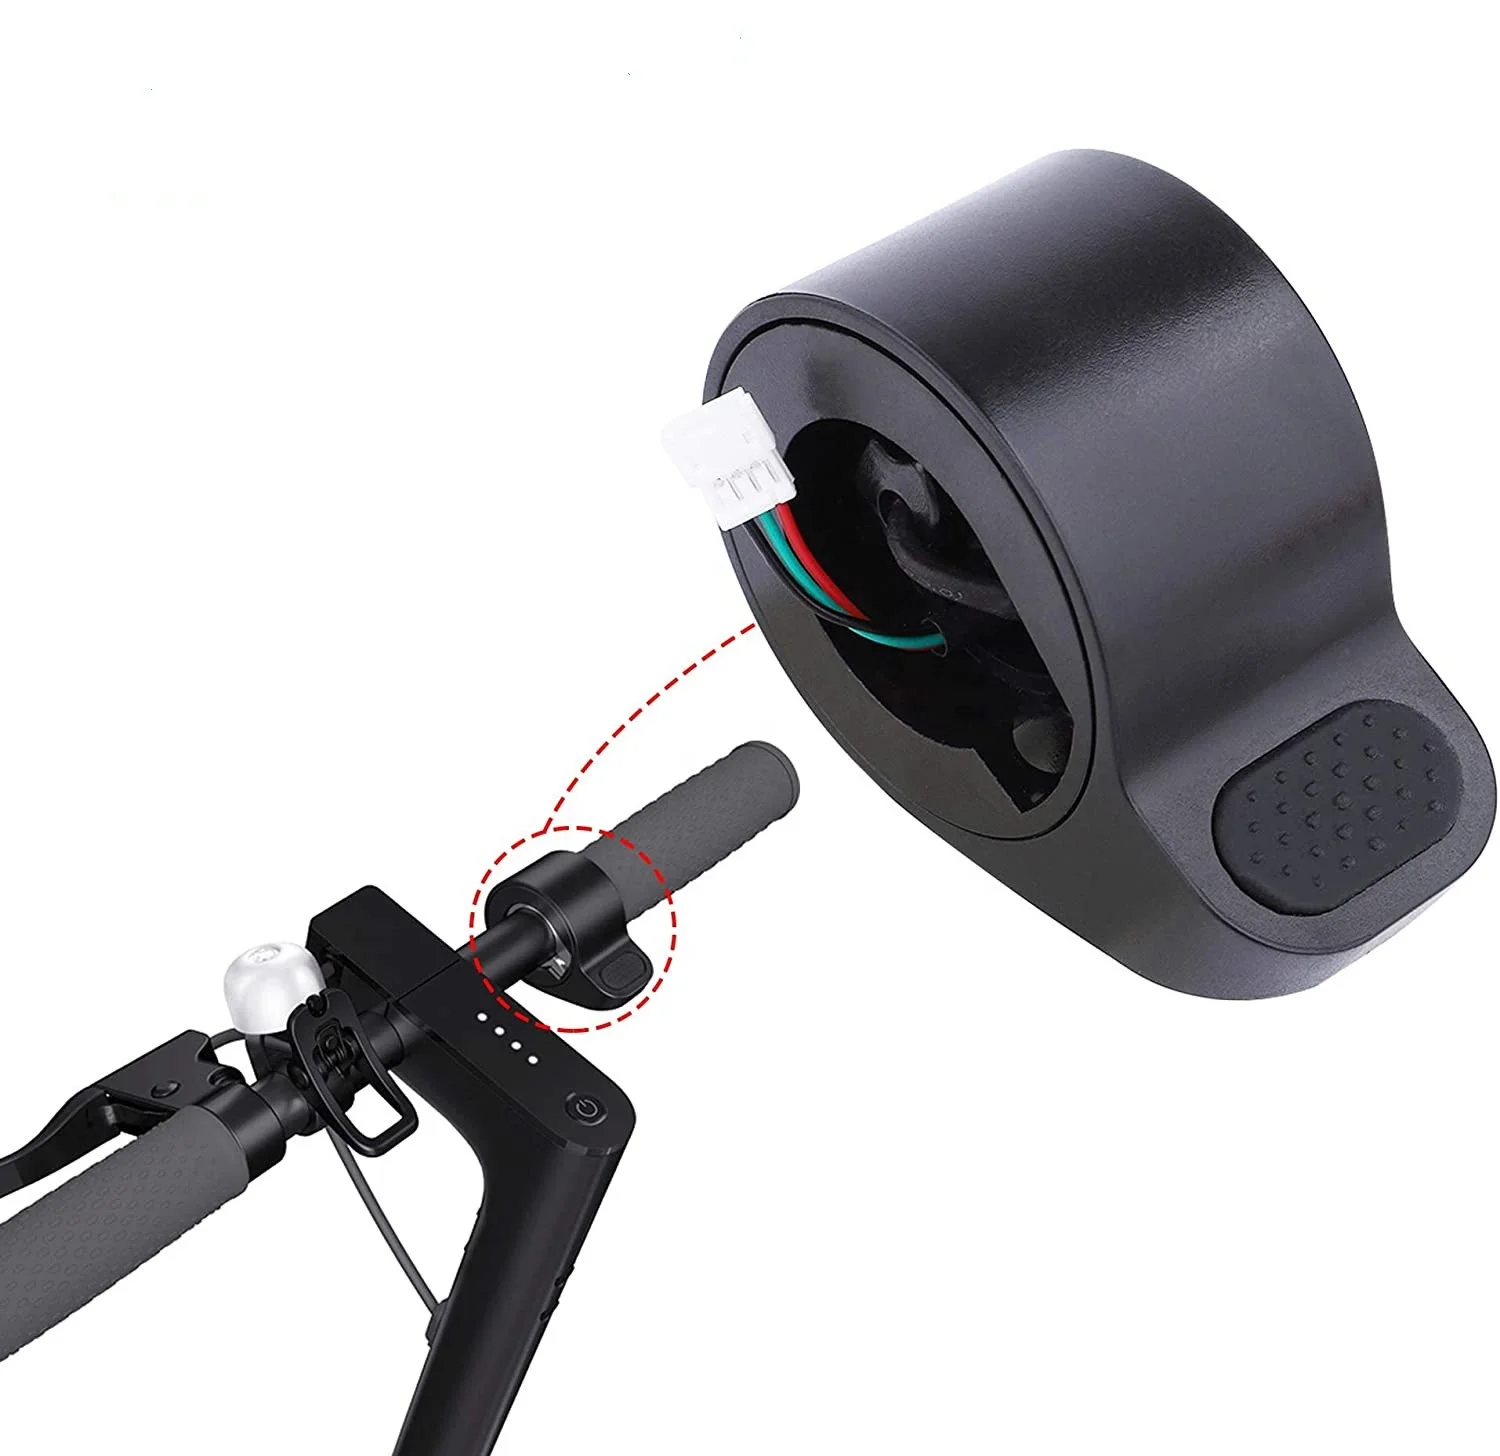 

Best Quality Throttle Accelerator for Xiaomi M365/Pro 1S Electric Scooter Accessories Replacement Part, Black